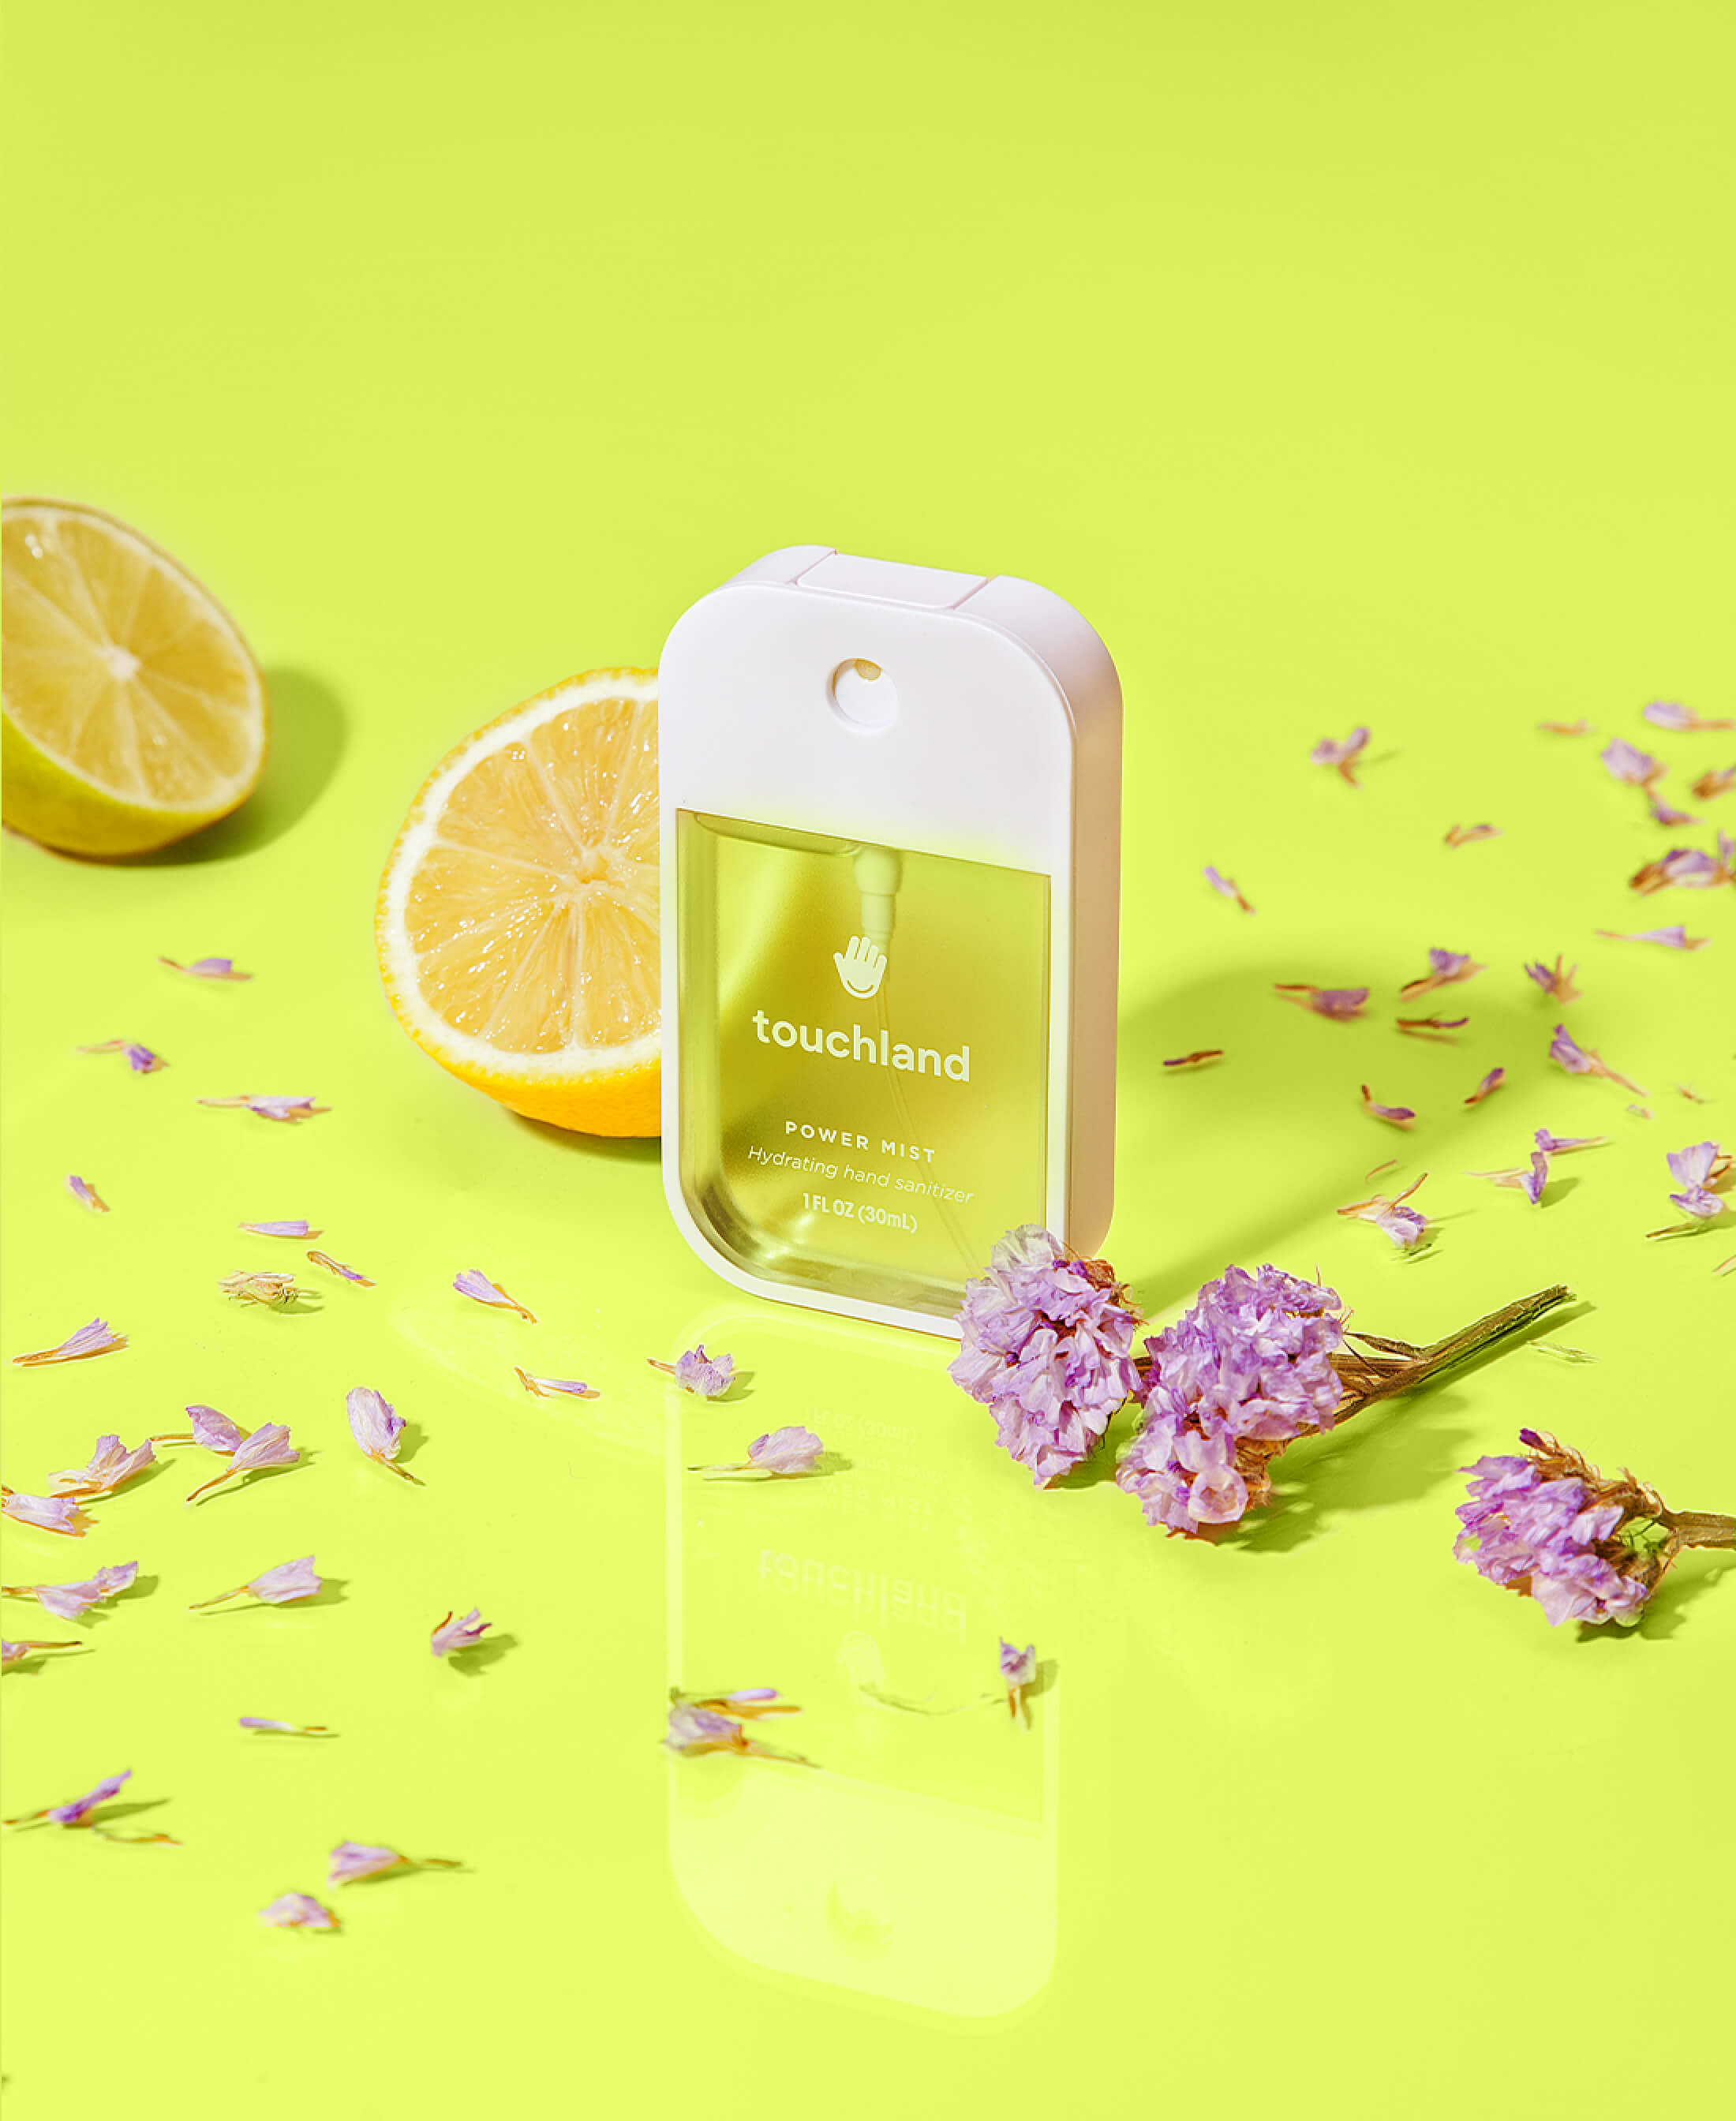 Touchland lemon lime spritz yellow sanitizer on light yellow background with purple flowers and lemons new